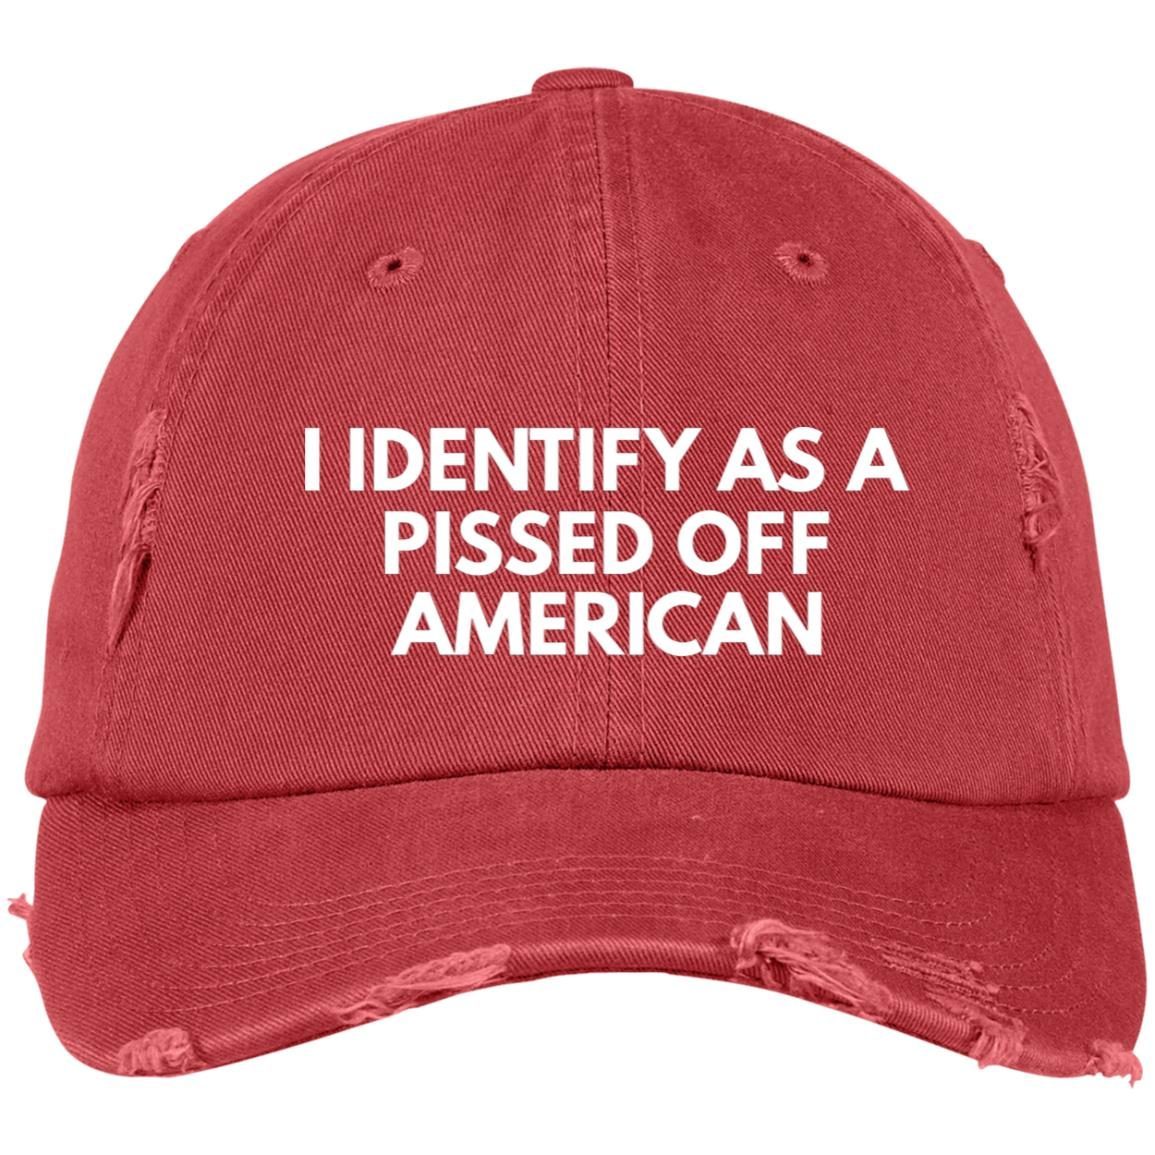 I Identify As A Pissed Off American Embroidered Hat Cap 2